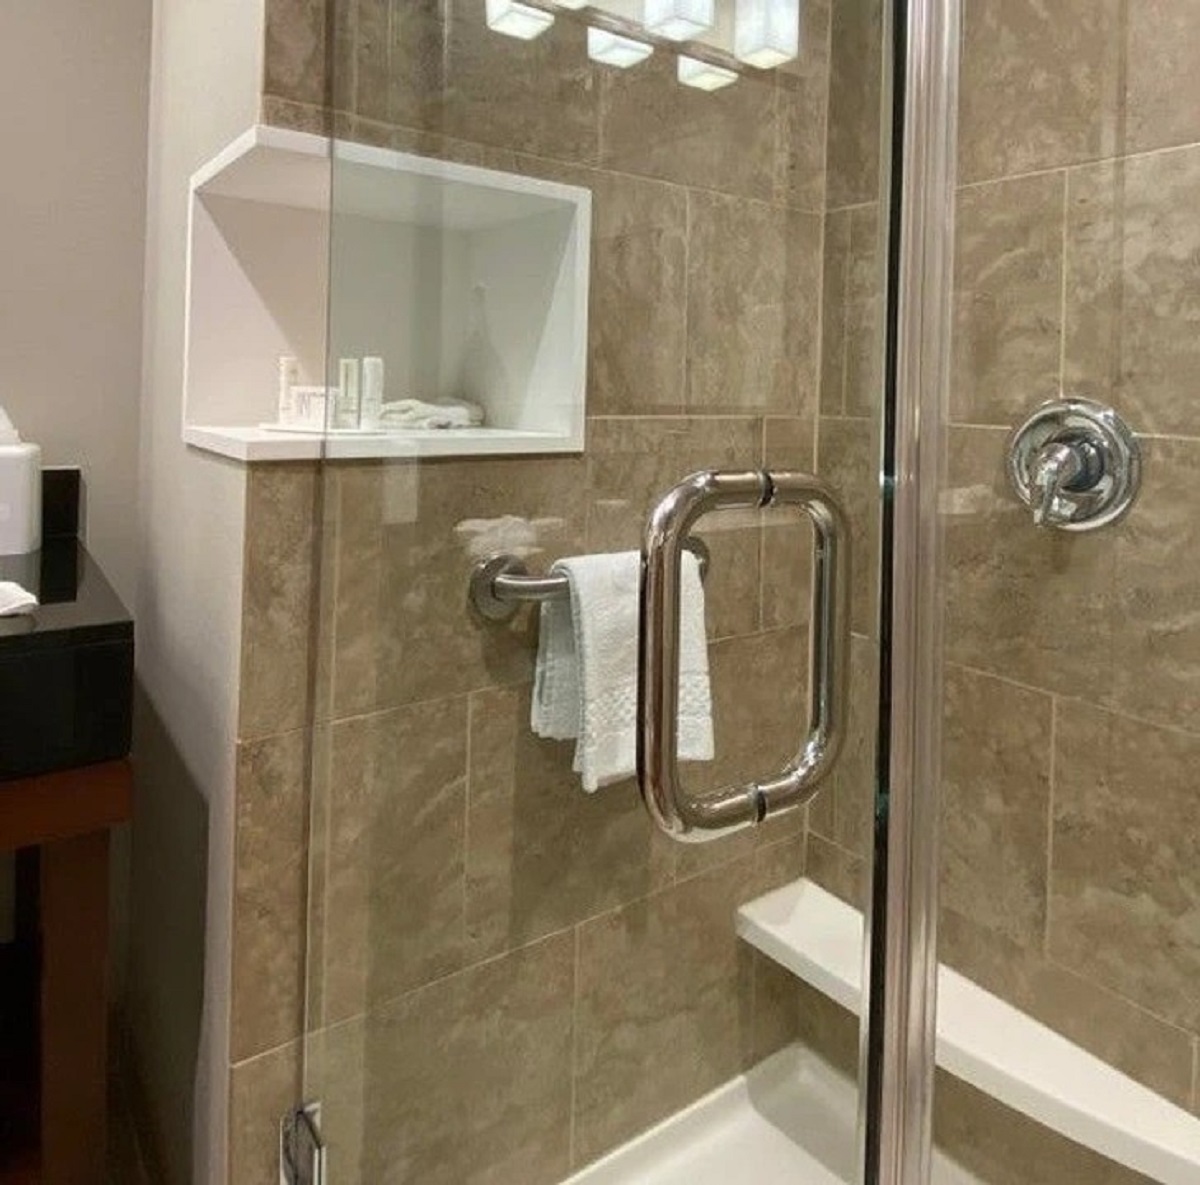 “This hotel I’m staying at has the shower shelf accessible from both inside as well as outside.”